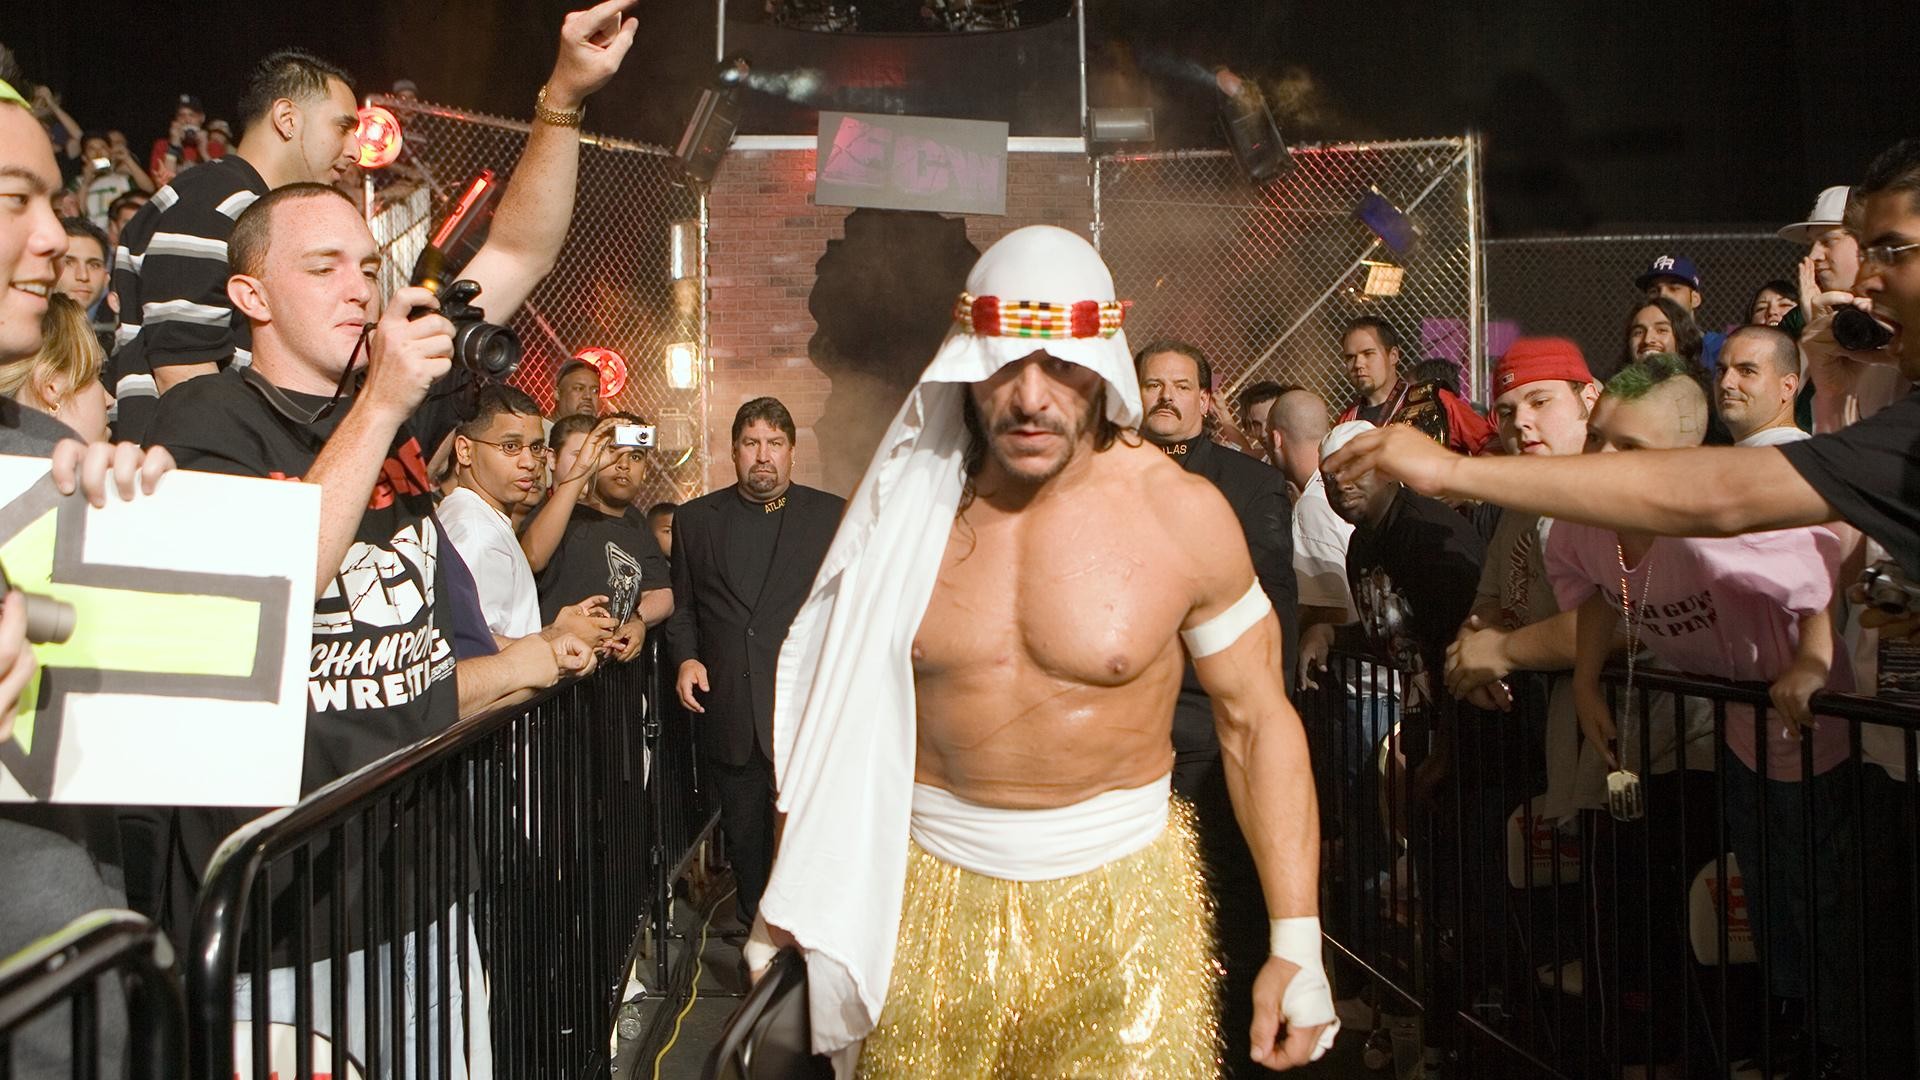 1920x1080 At 52 and coming off a hip replacement, Sabu just wants to keep wrestling